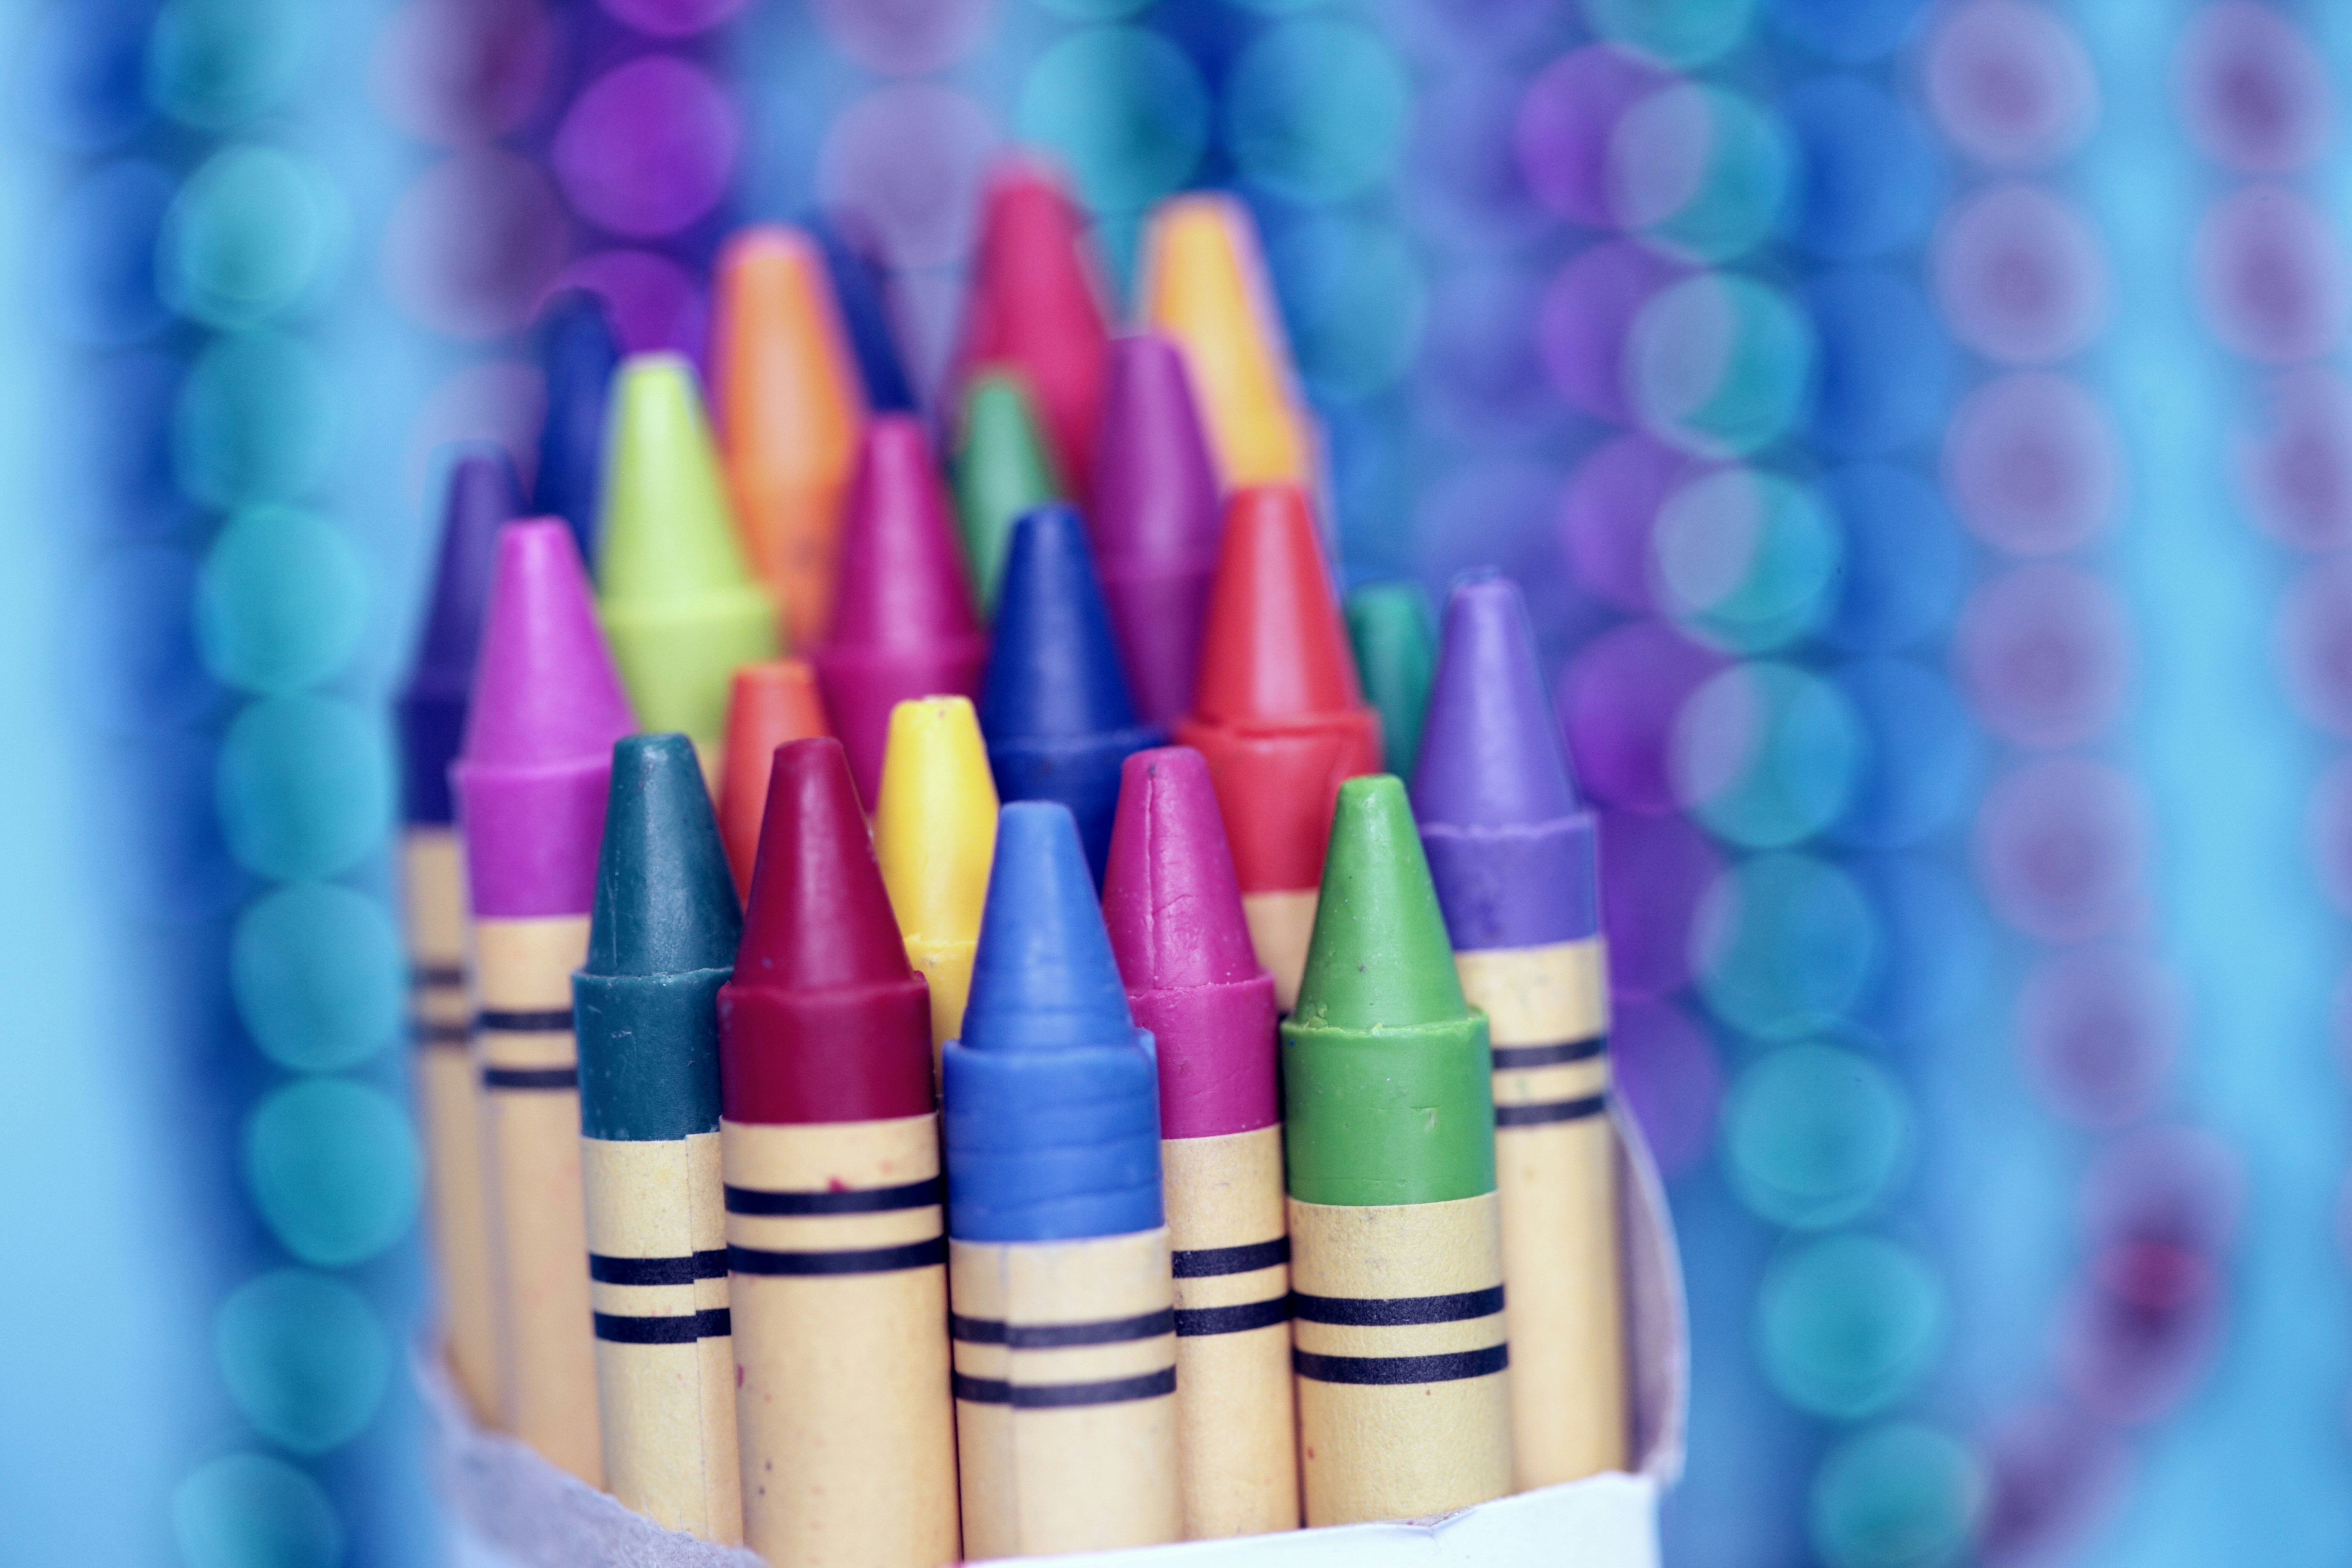 The lovely bokeh in the background was made by hanging strings of colorful beads behind the box of crayons.